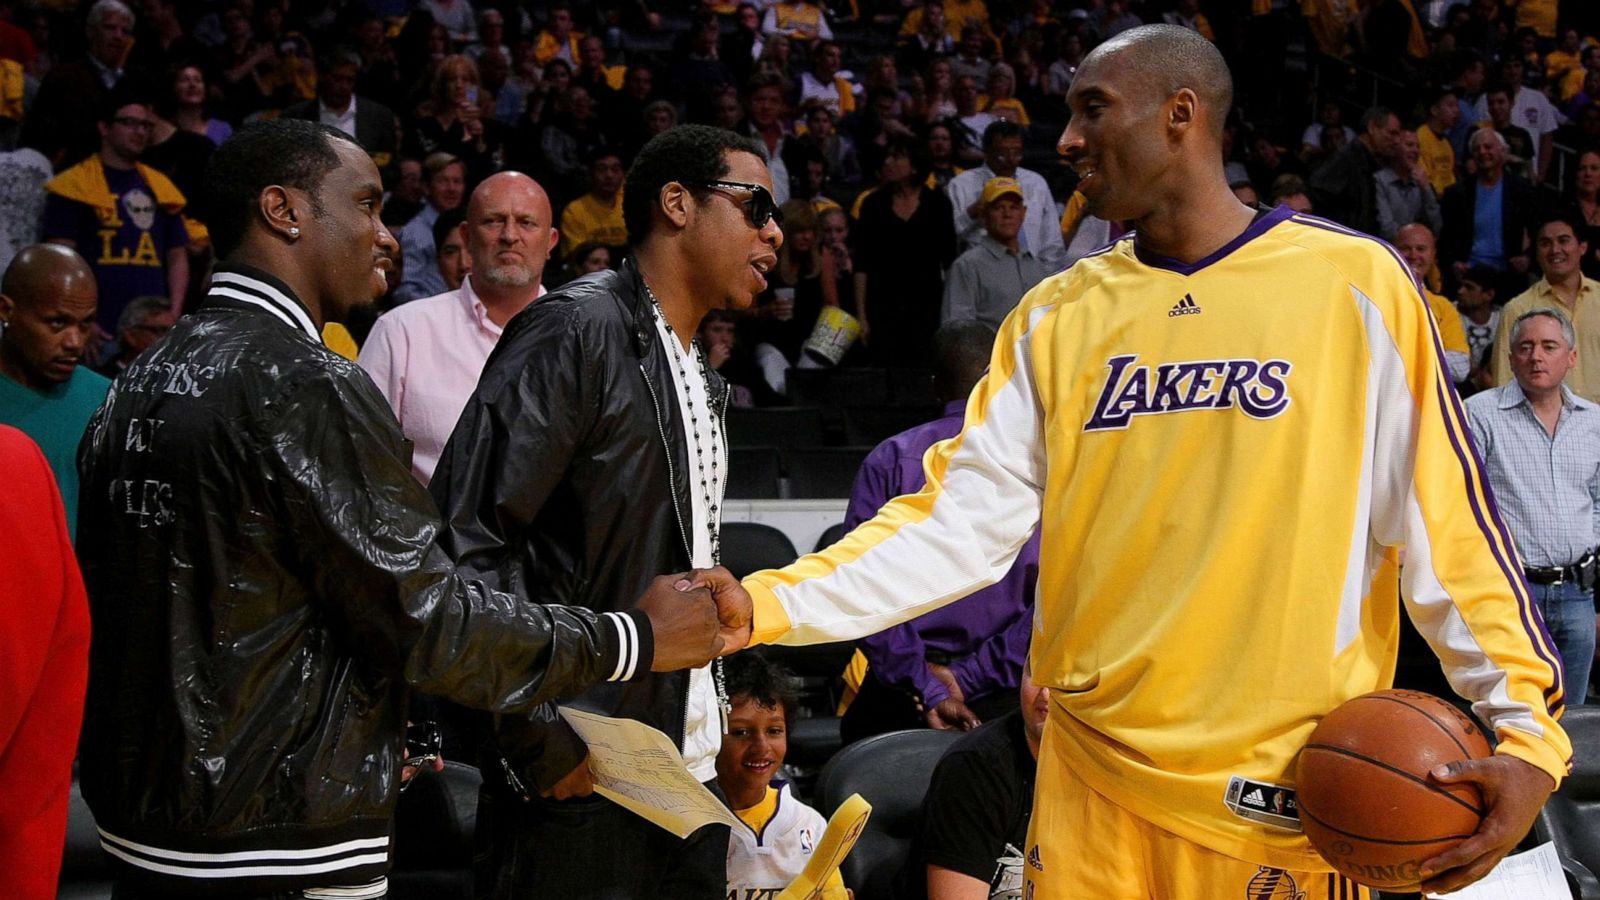 13 LAKERS ideas  lakers, los angeles lakers, hip hop outfits